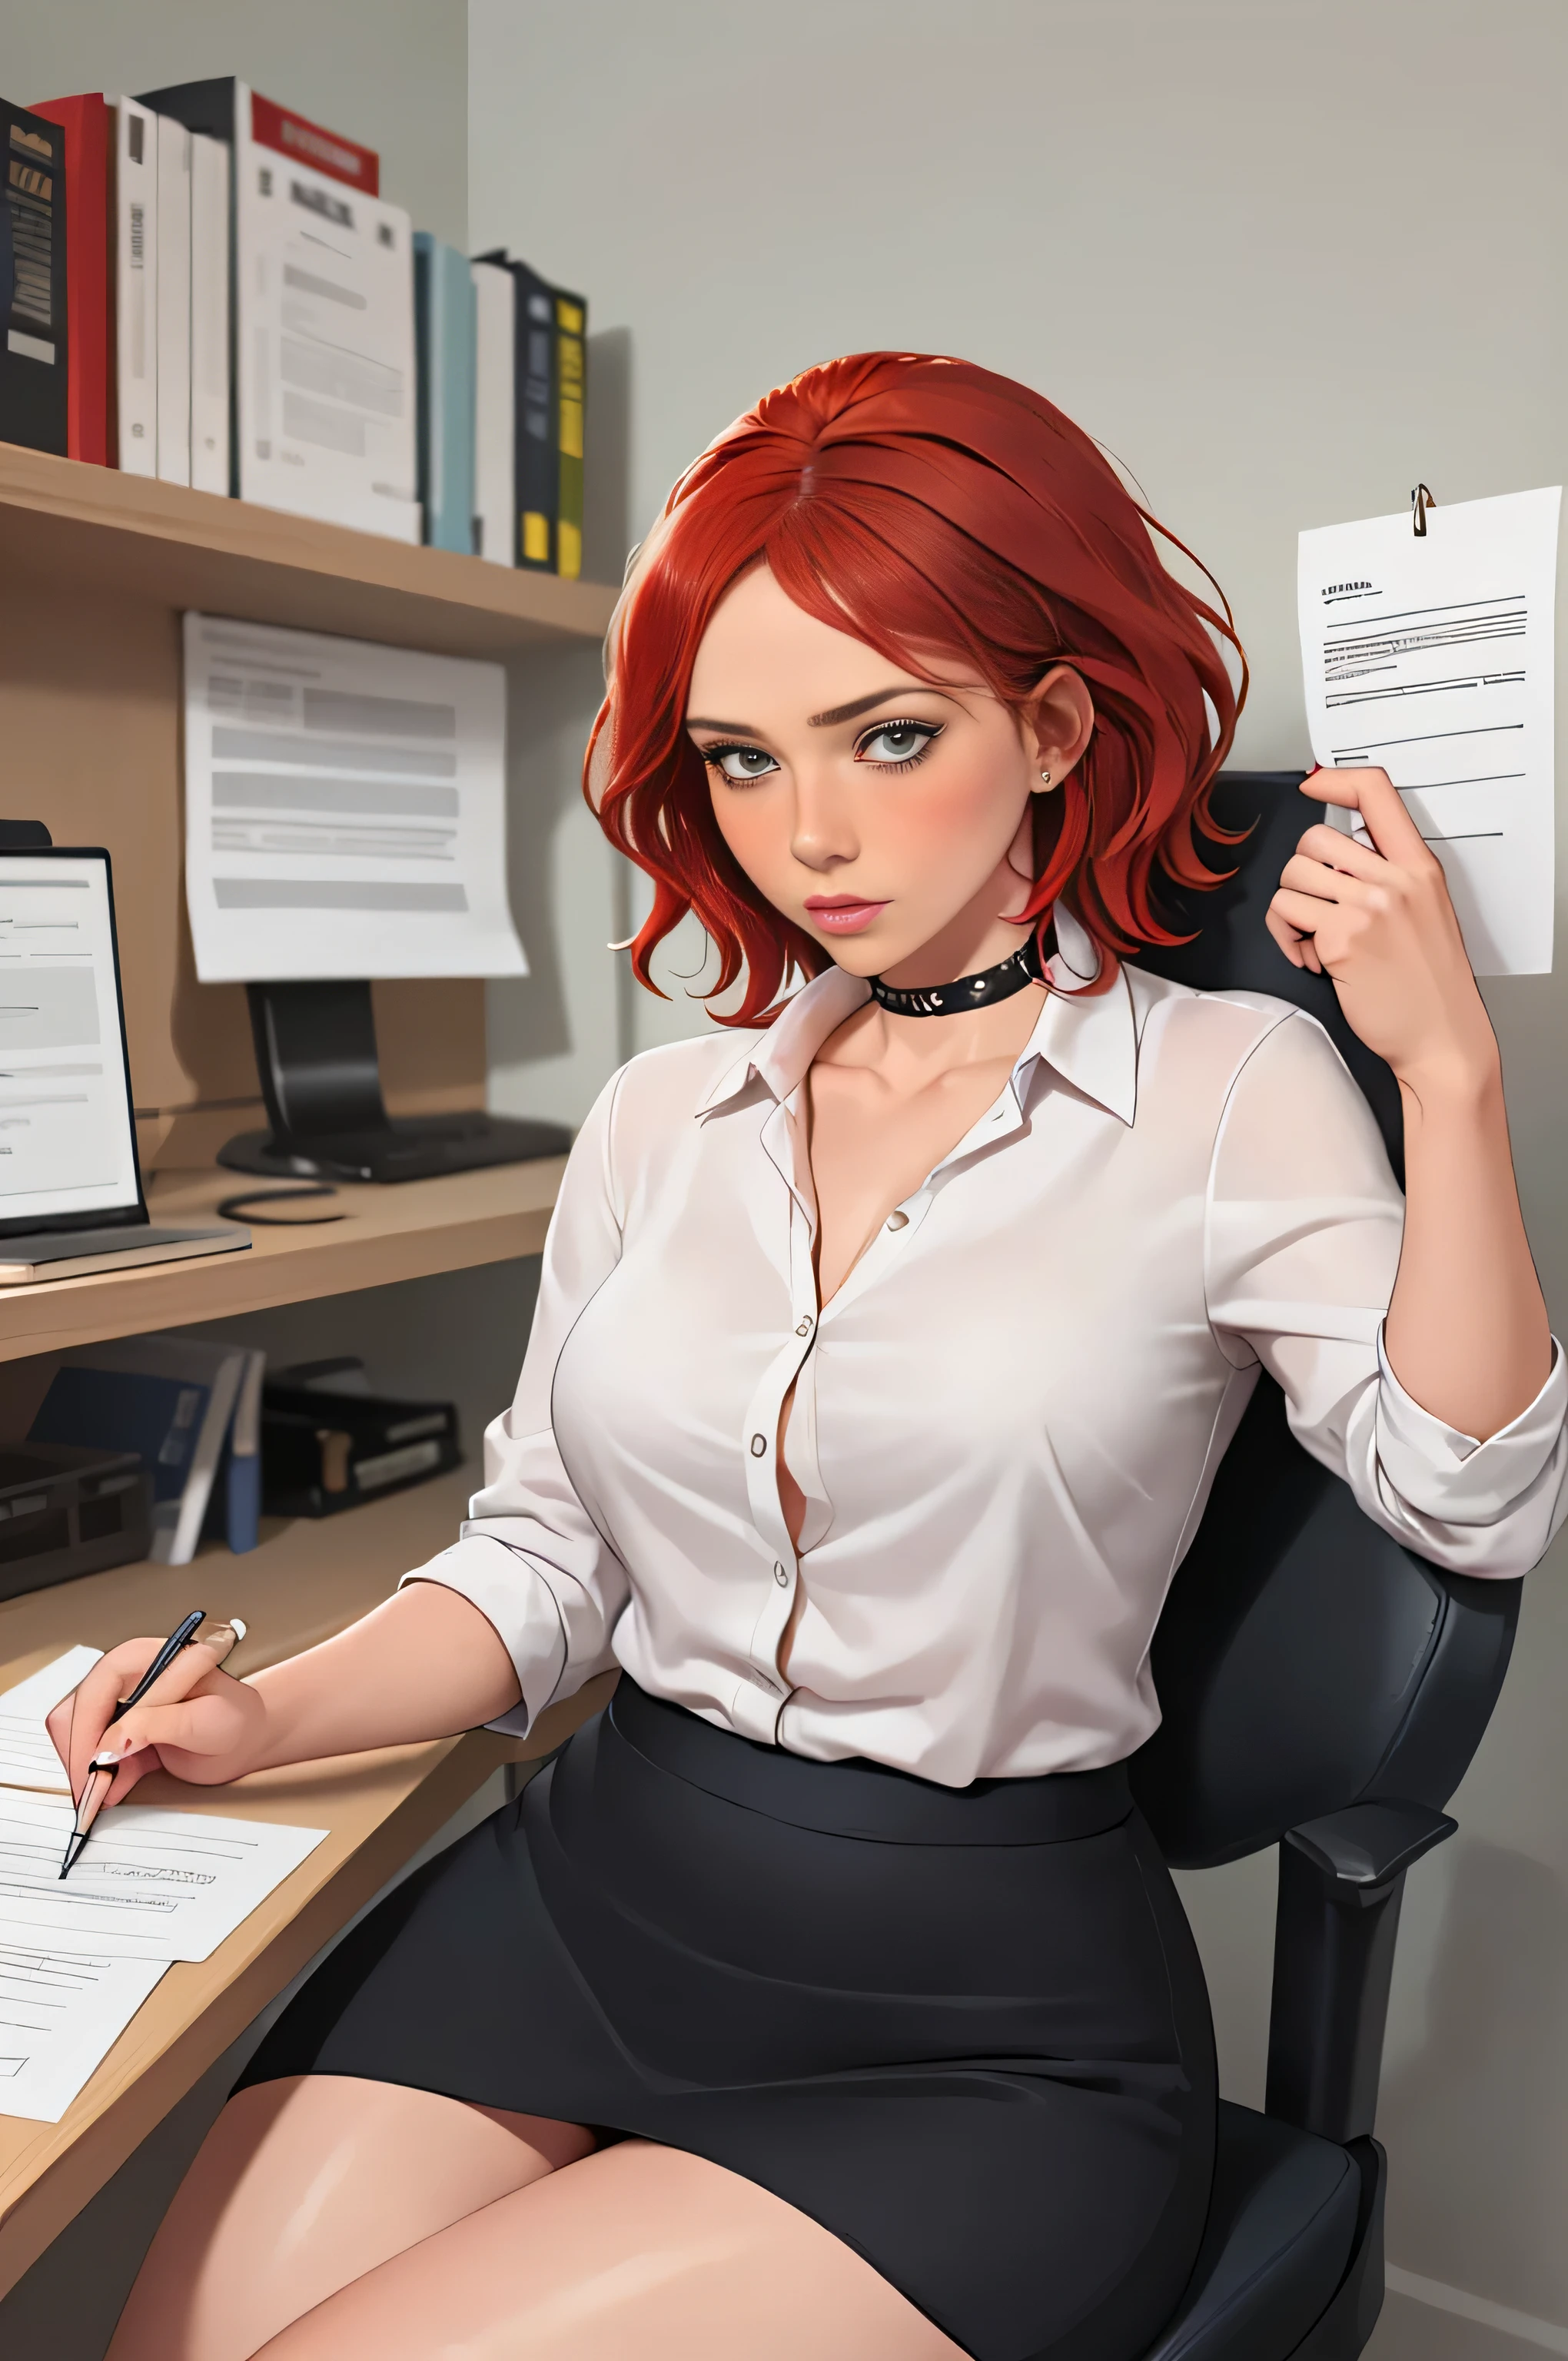 Scarlett Johansson, (masterpiece quality, (masterpiece quality:1.3), realistic, (realistic:1.3), 1girl, (1girl:1.9), solo, (solo:1.9), in an office, paperwork in background, typewriter in background, short hair, red hair, (red hair:1.5), wearing a business suit, wearing a white blouse, (white blouse:1.5), wearing black skirt, (wearing black skirt:1.5), wearing choker collar, small breasts, thin body, blushing, (blushing:1.2), 